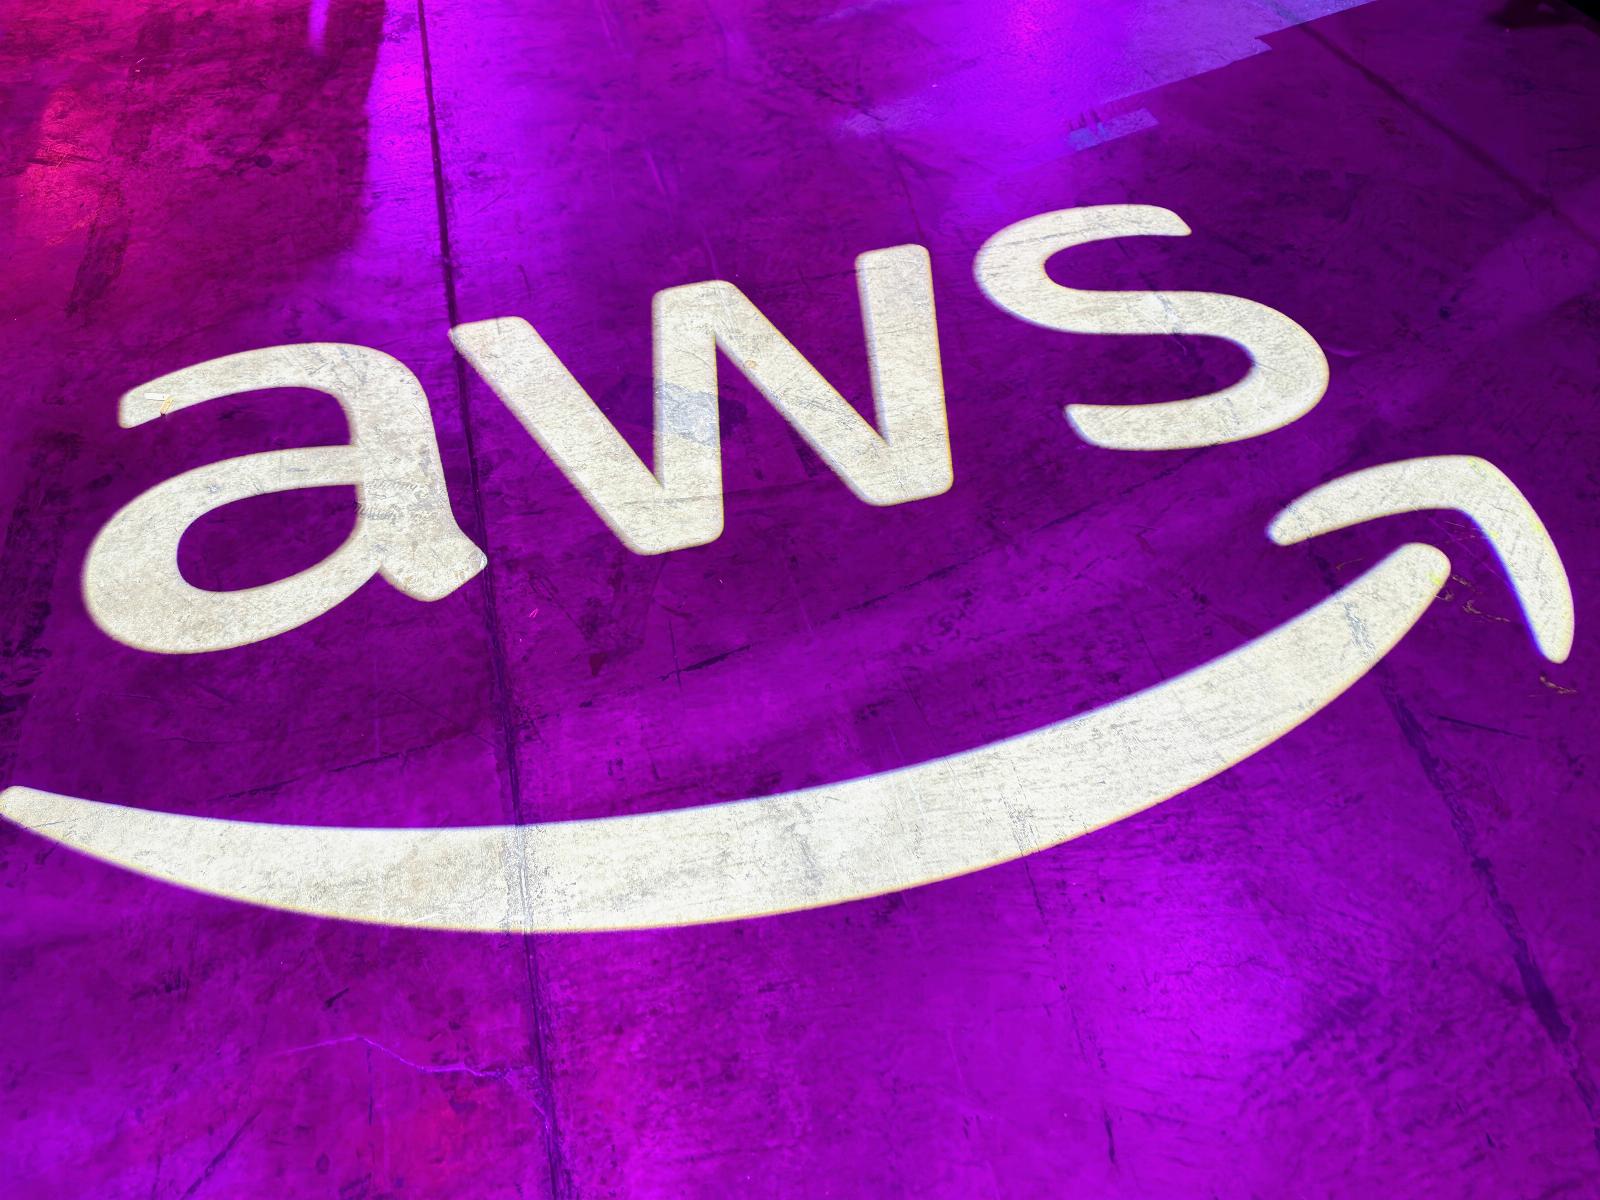 AWS unveils new service for cloud-based rendering projects